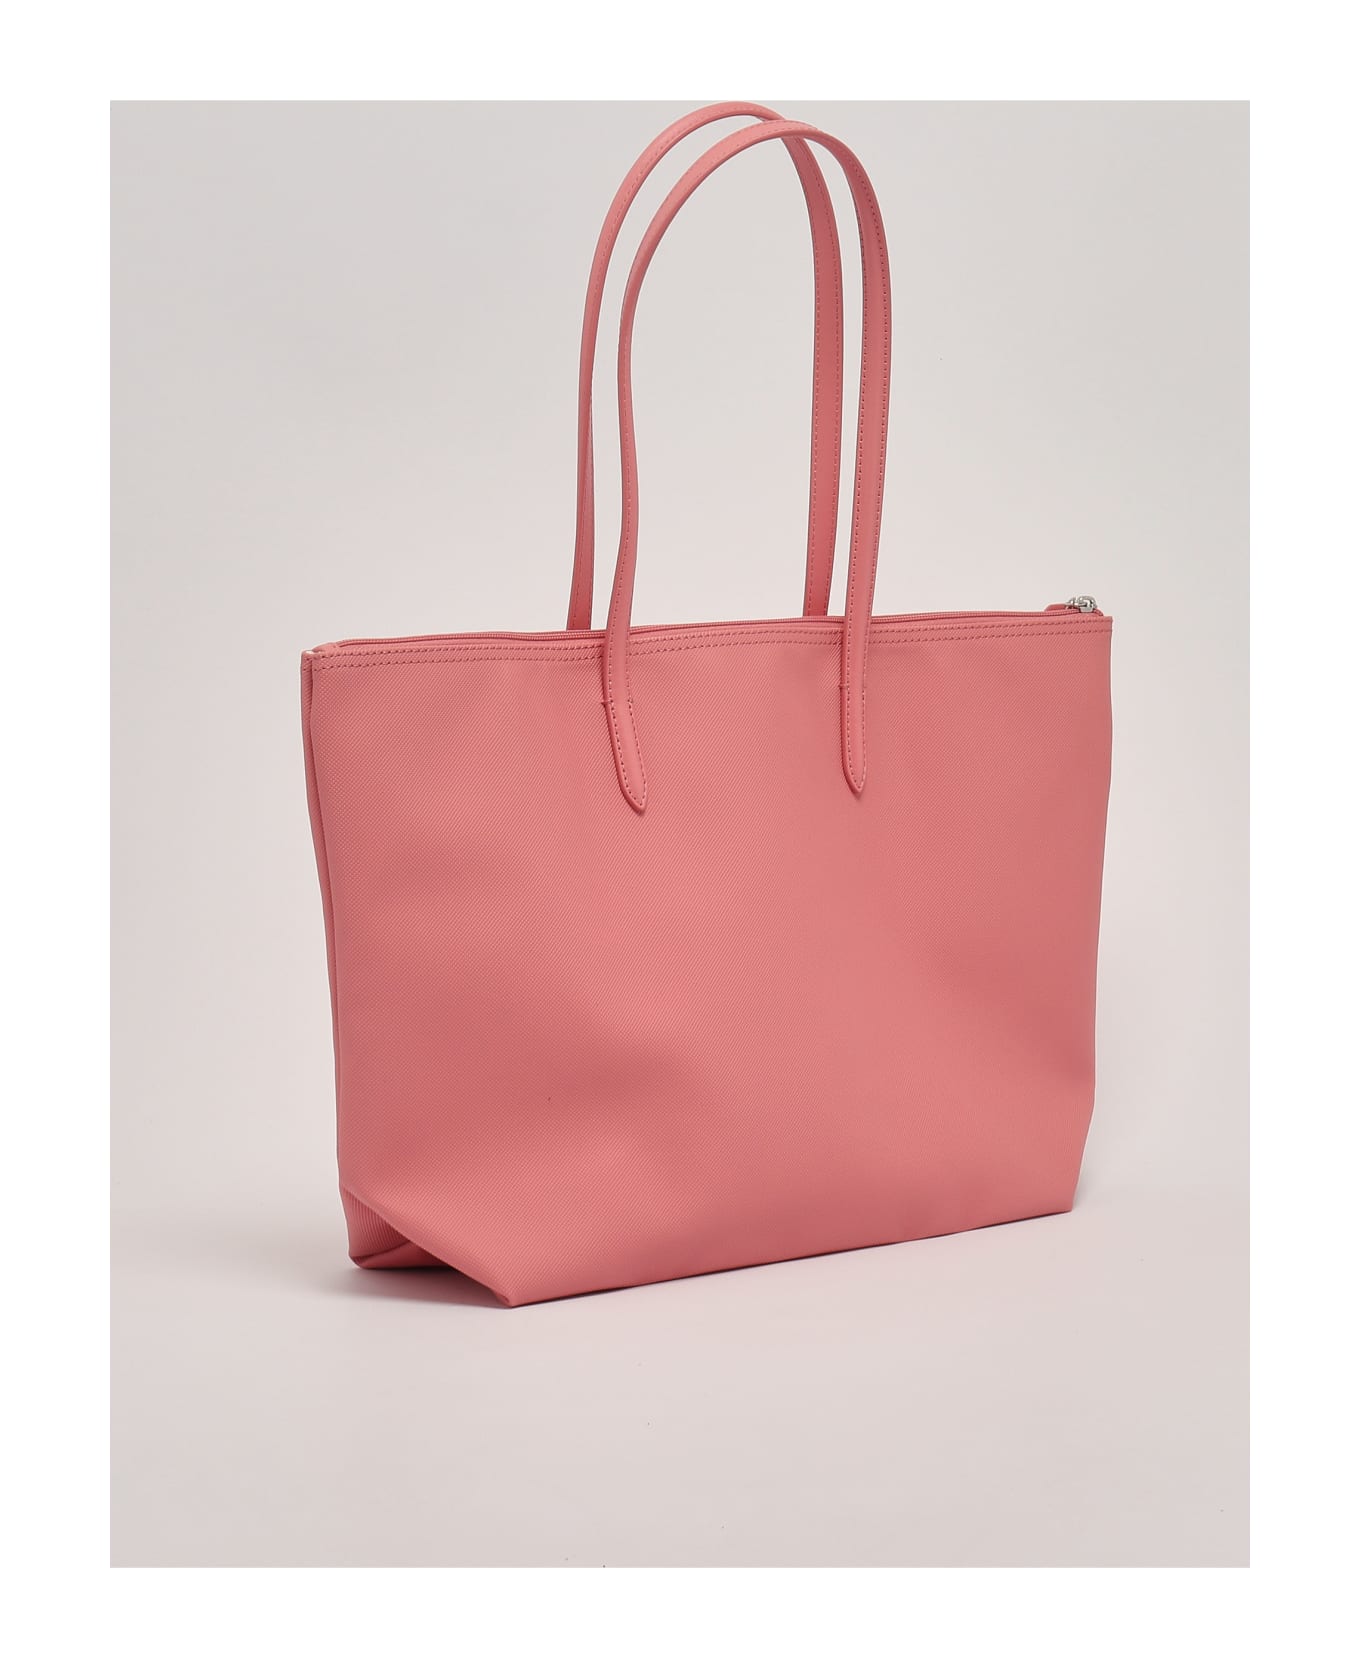 Lacoste Pvc Shopping Bag - ROSA CARICO トートバッグ